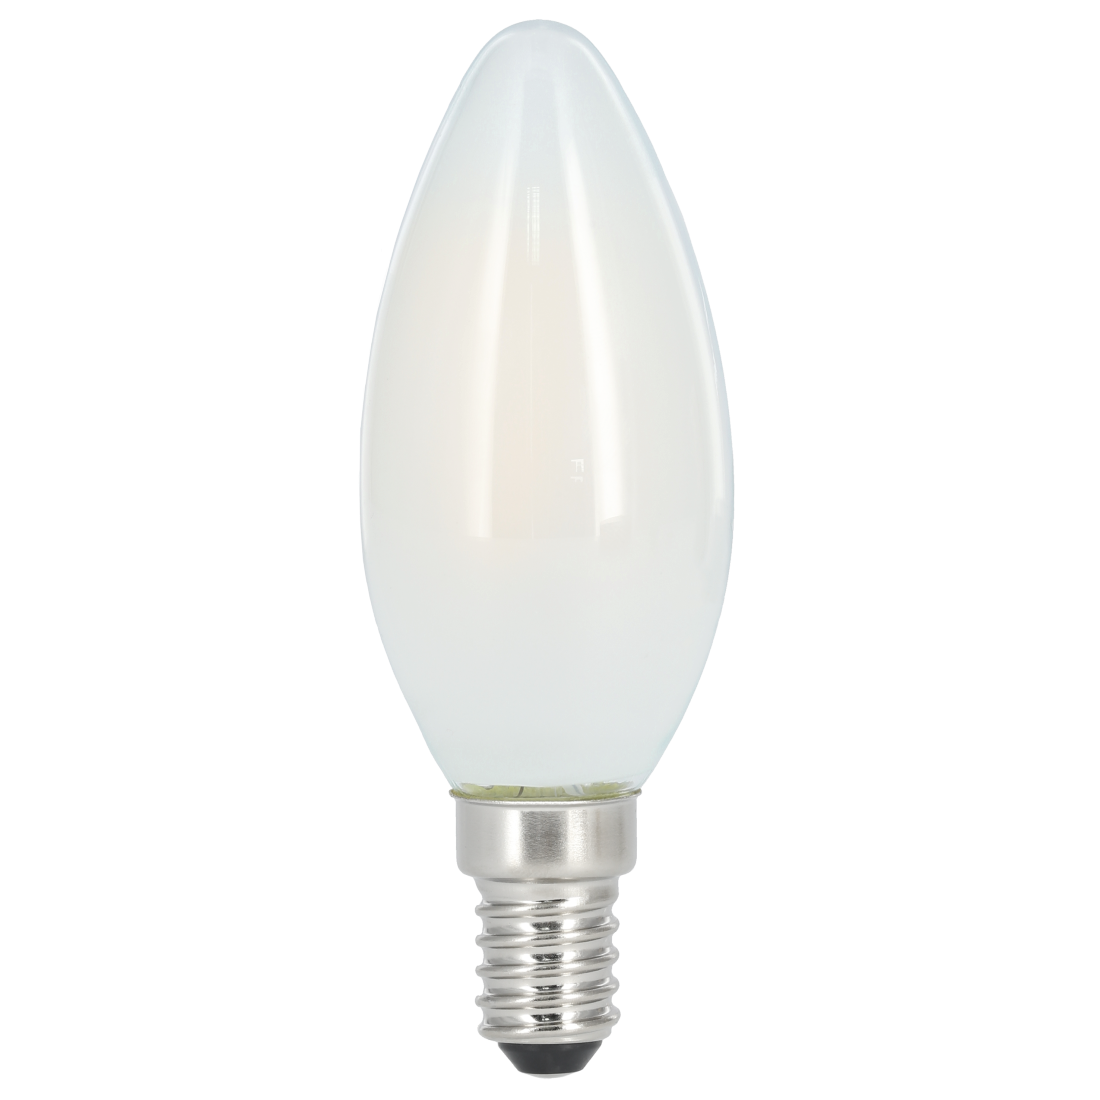 abx High-Res Image - Xavax, LED Filament, E14, 470 lm Replaces 40 W, Candle, warm white, matt, RA90, Dimmable